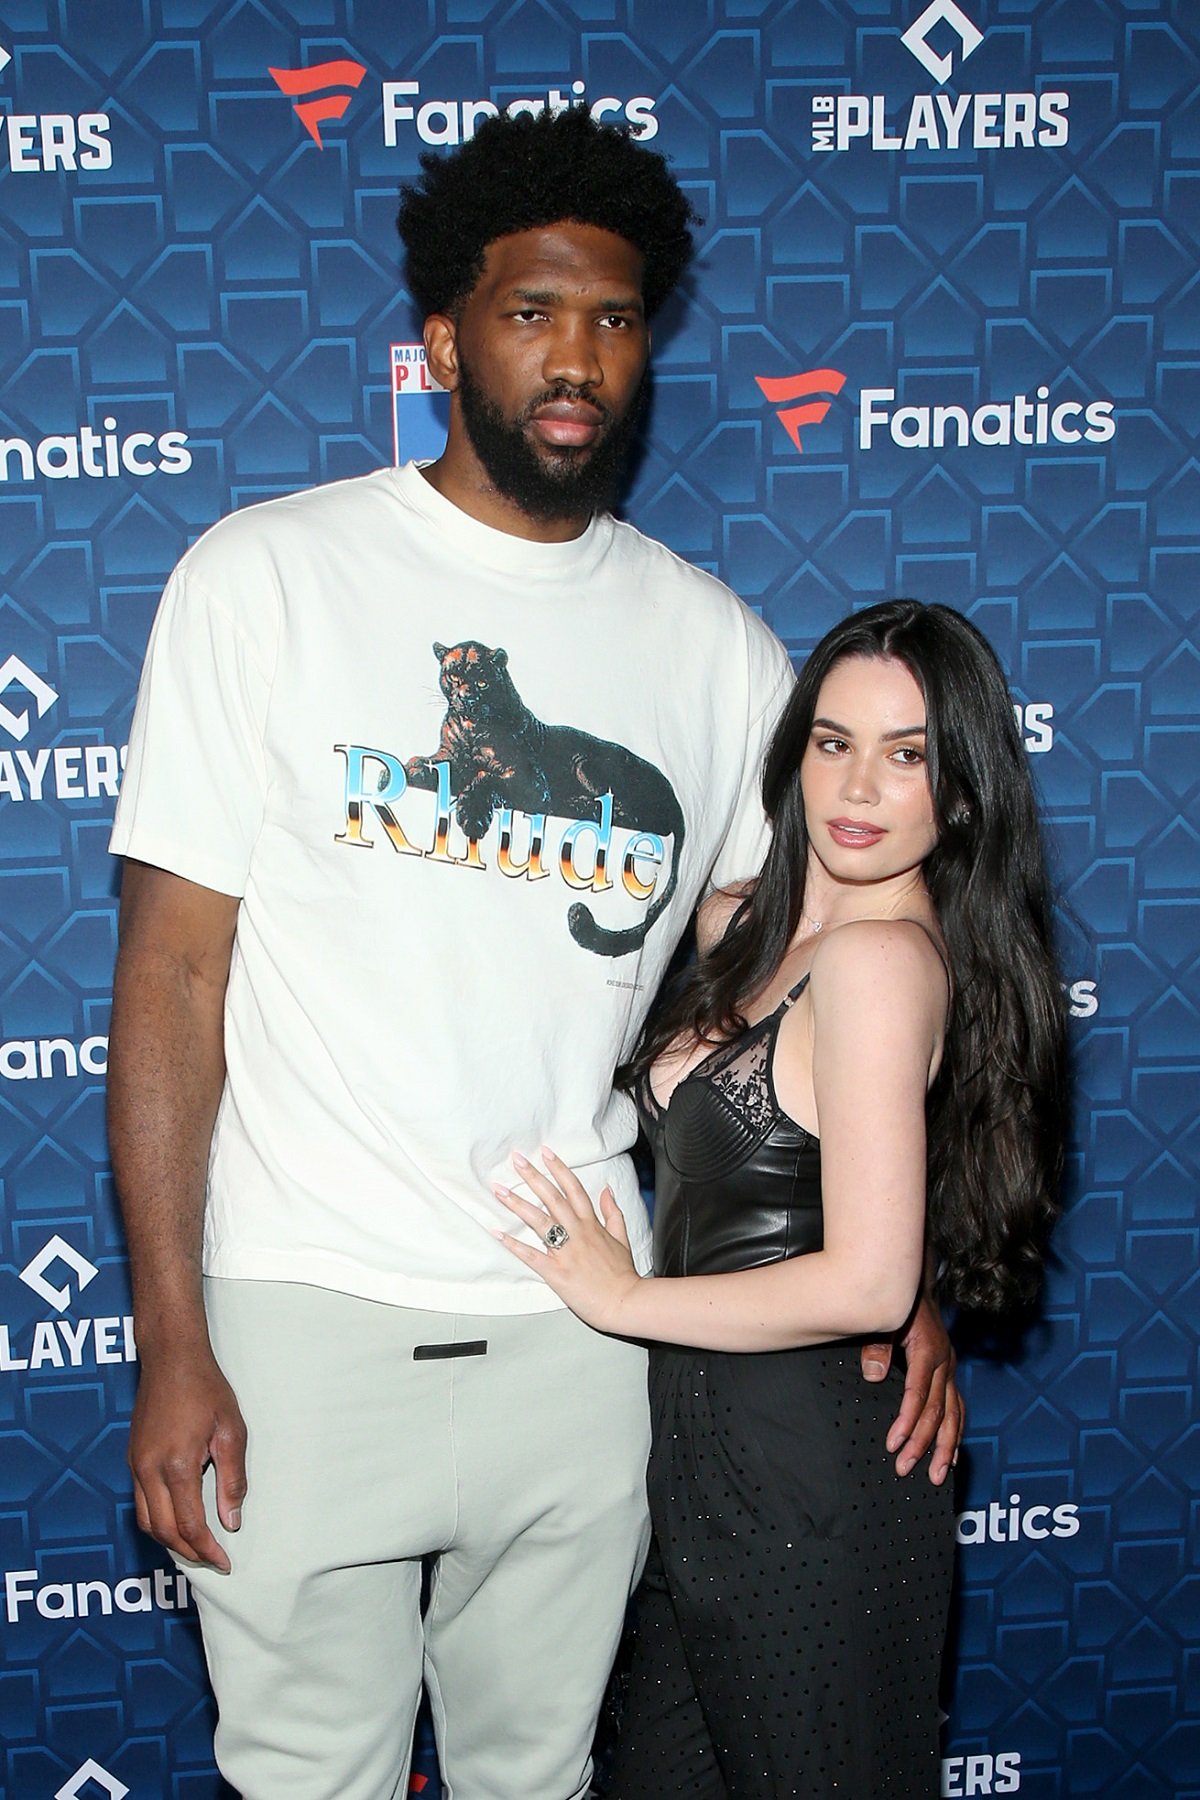 Joel Embiid and Anne de Paula pose on the carpet together at the “Players Party”